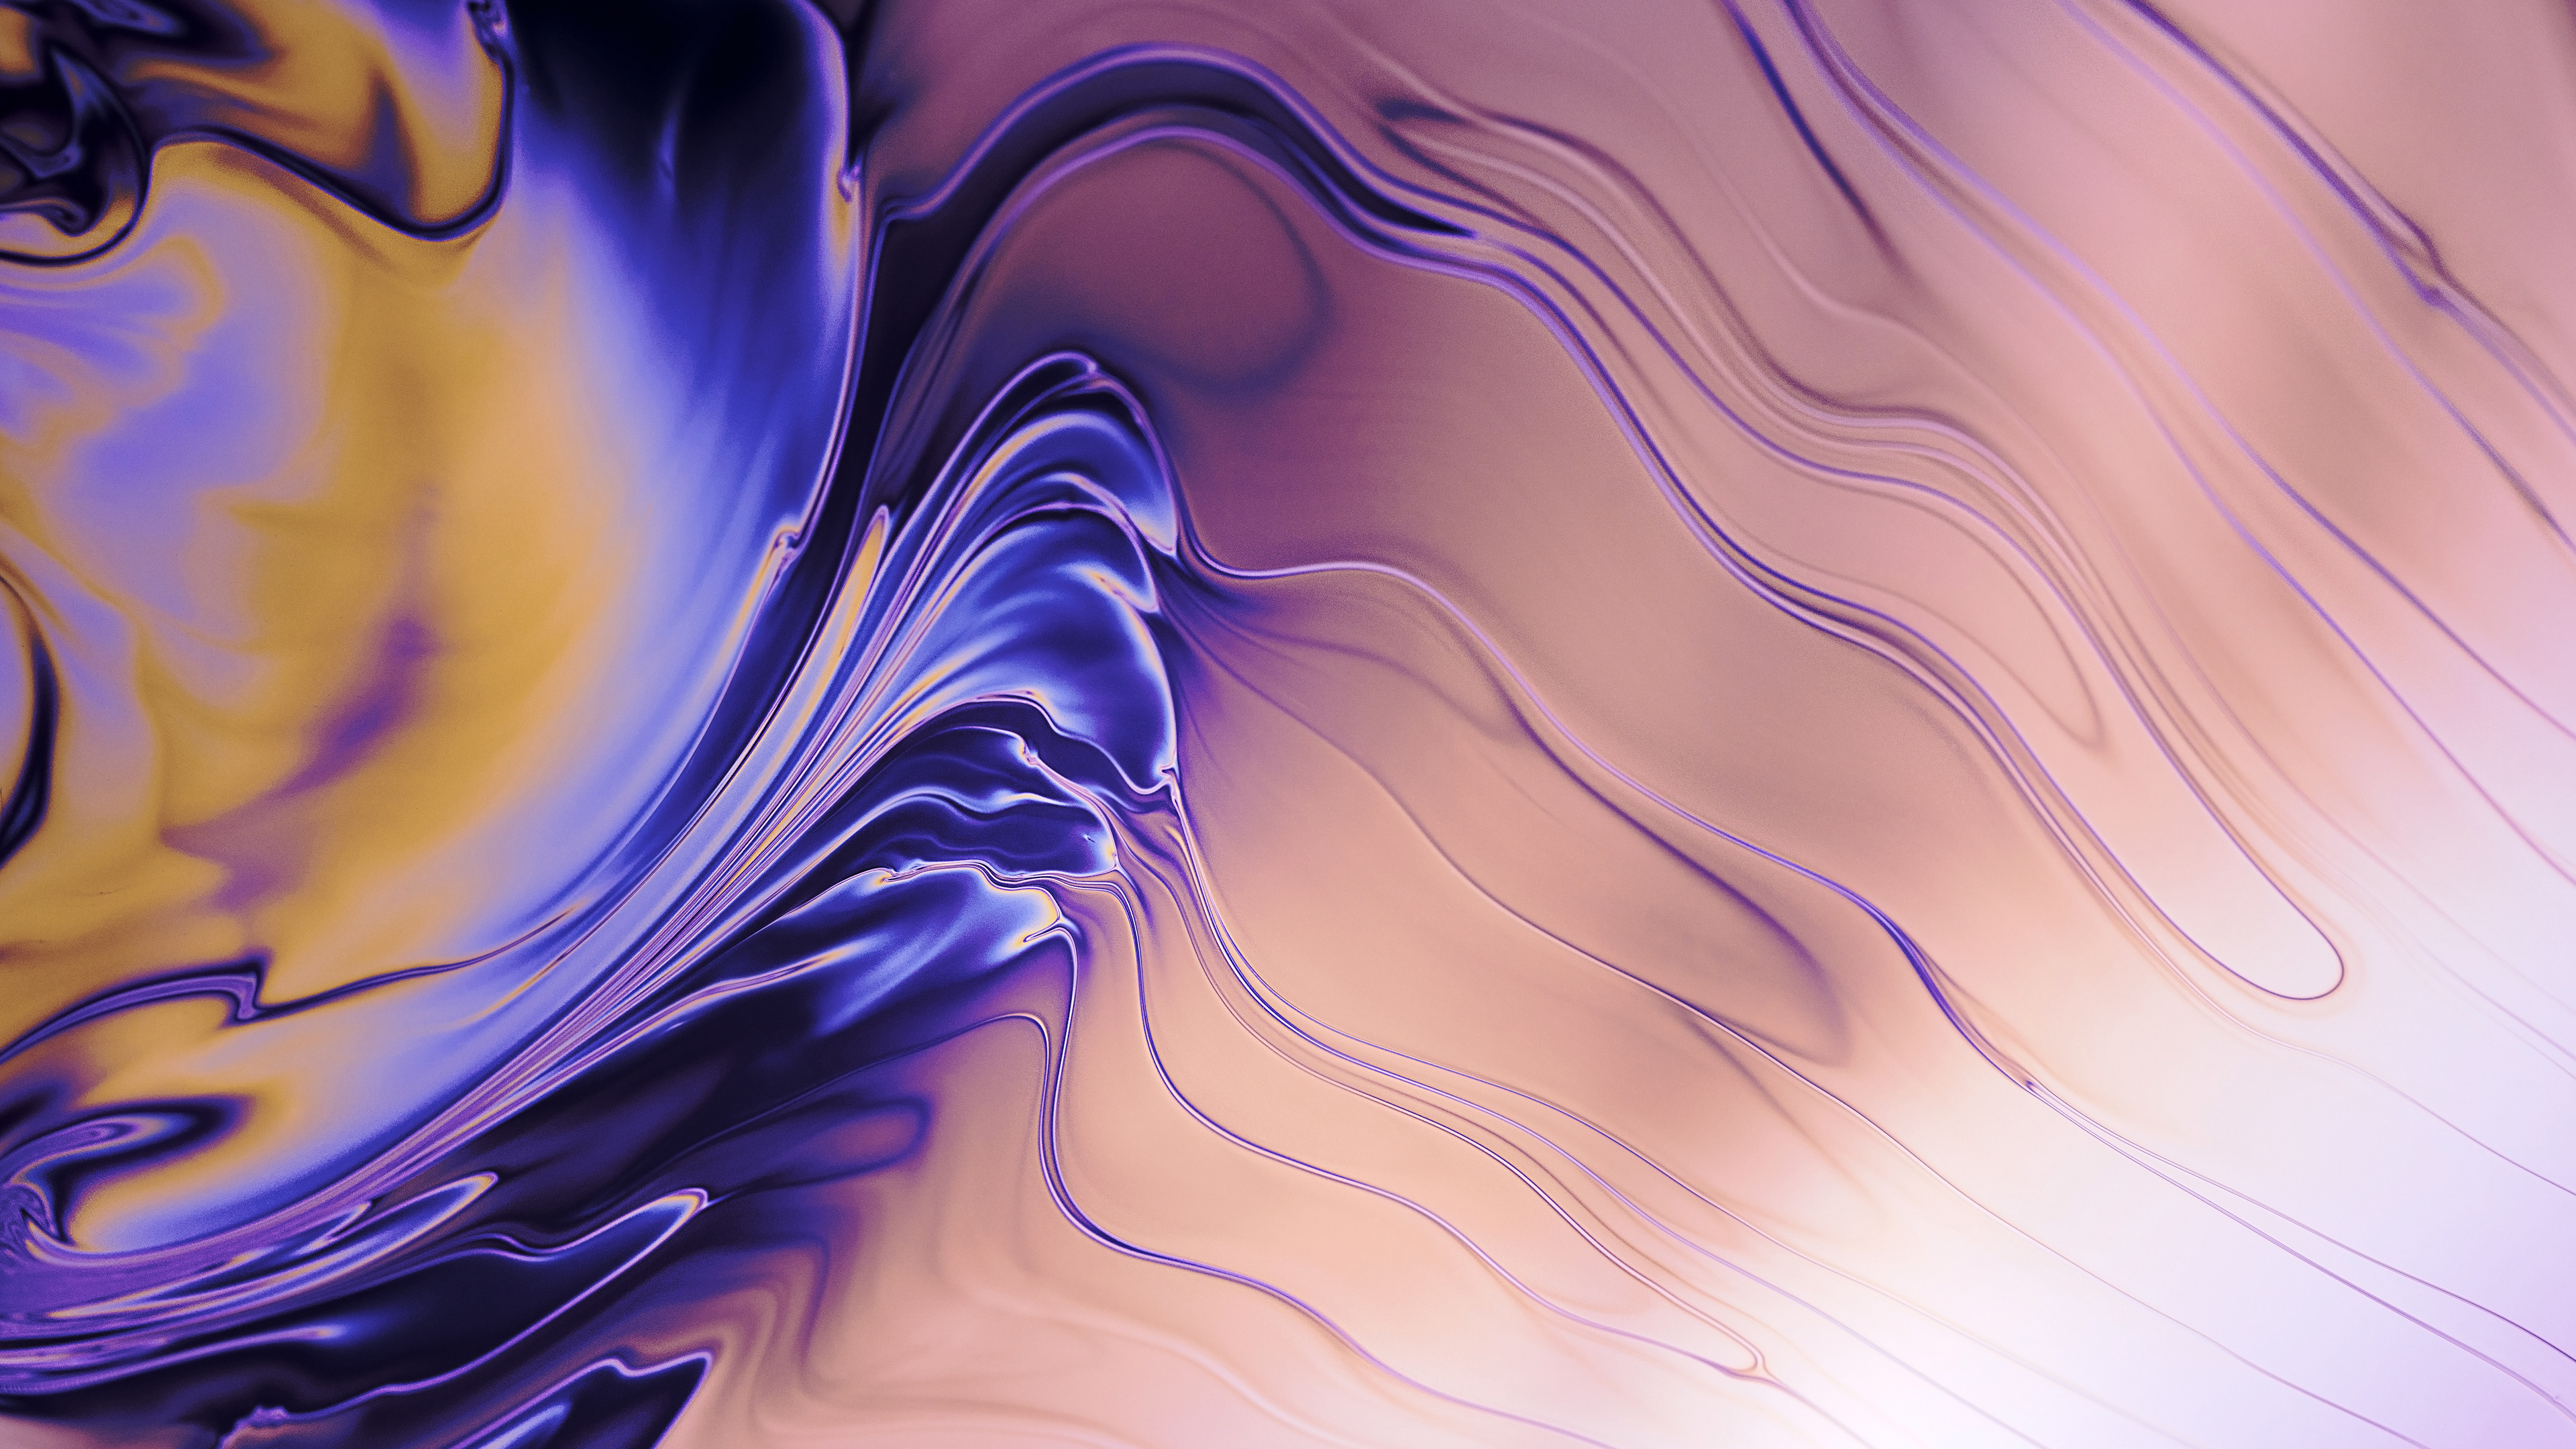 Liquid 4K wallpapers for your desktop or mobile screen free and easy to  download